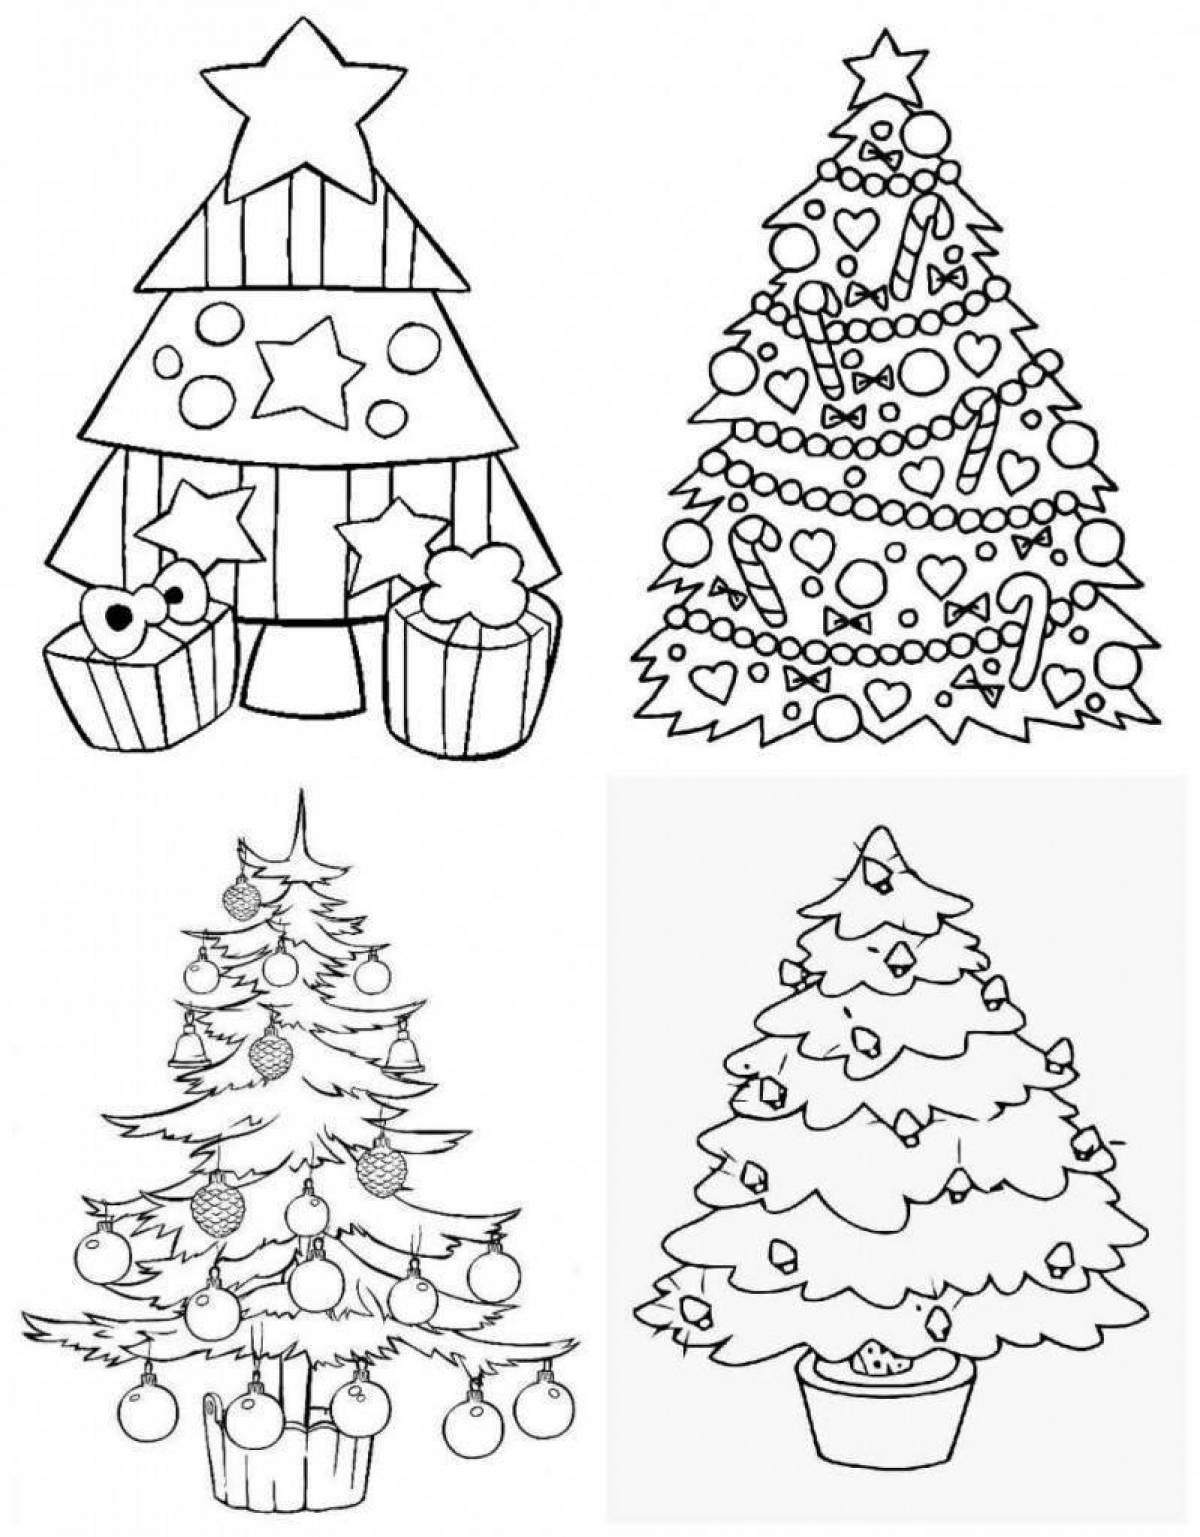 Coloring funny little Christmas tree